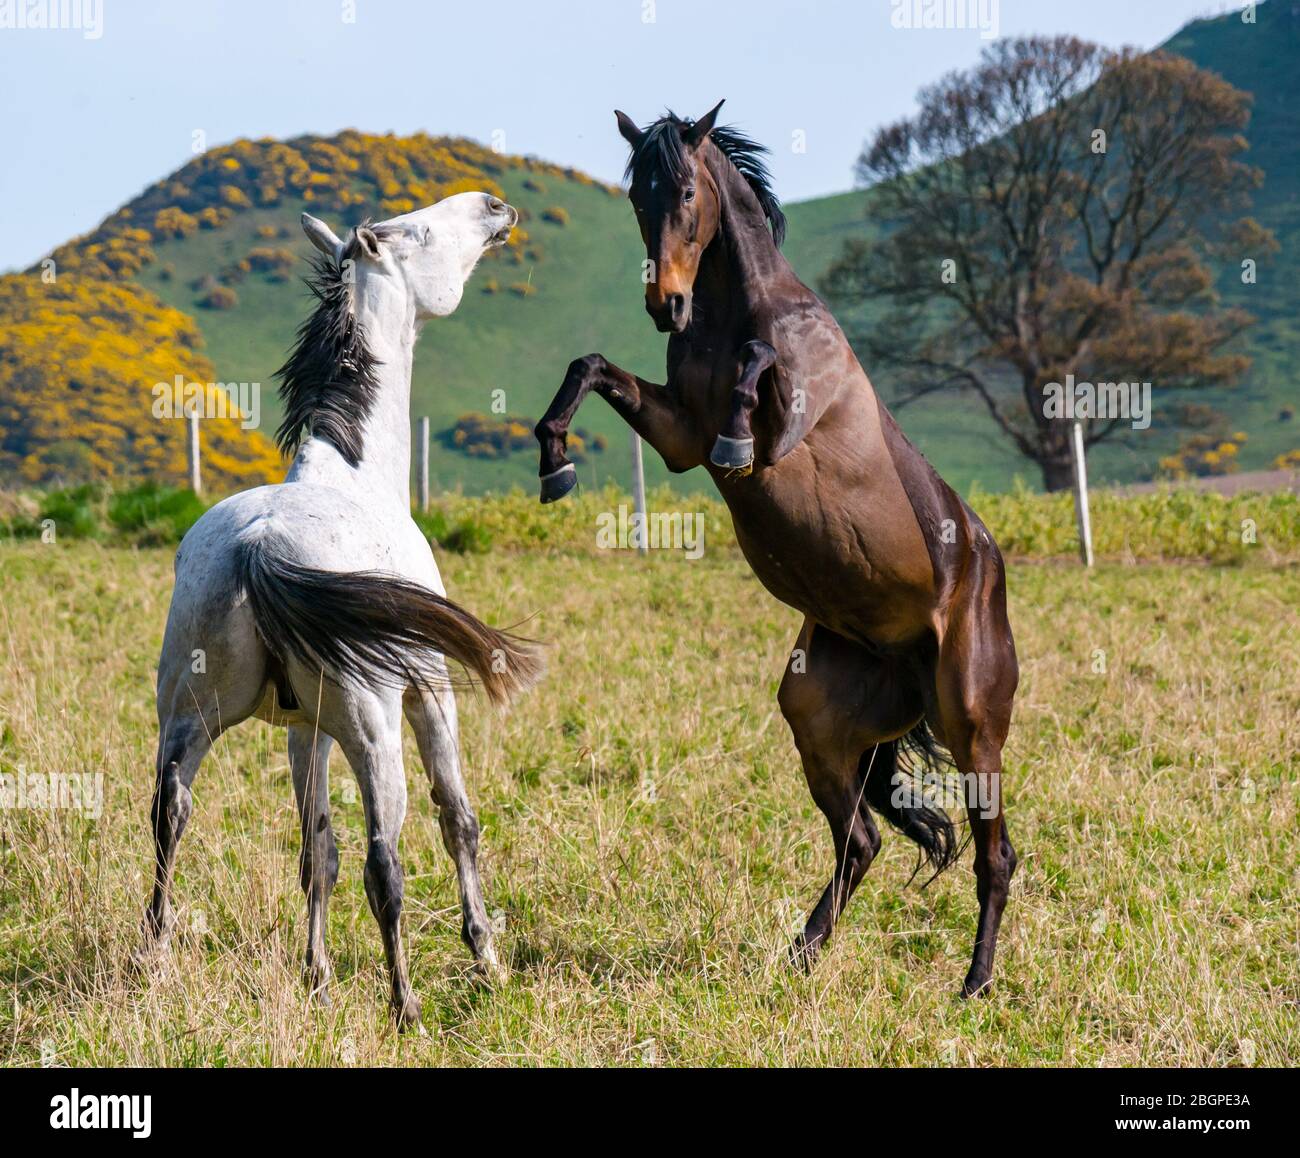 East Lothian, Scotland, United Kingdom, 22nd April 2020. UK Weather: A pair of horses are playful in the sunshine with one horse rearing up at the other Stock Photo